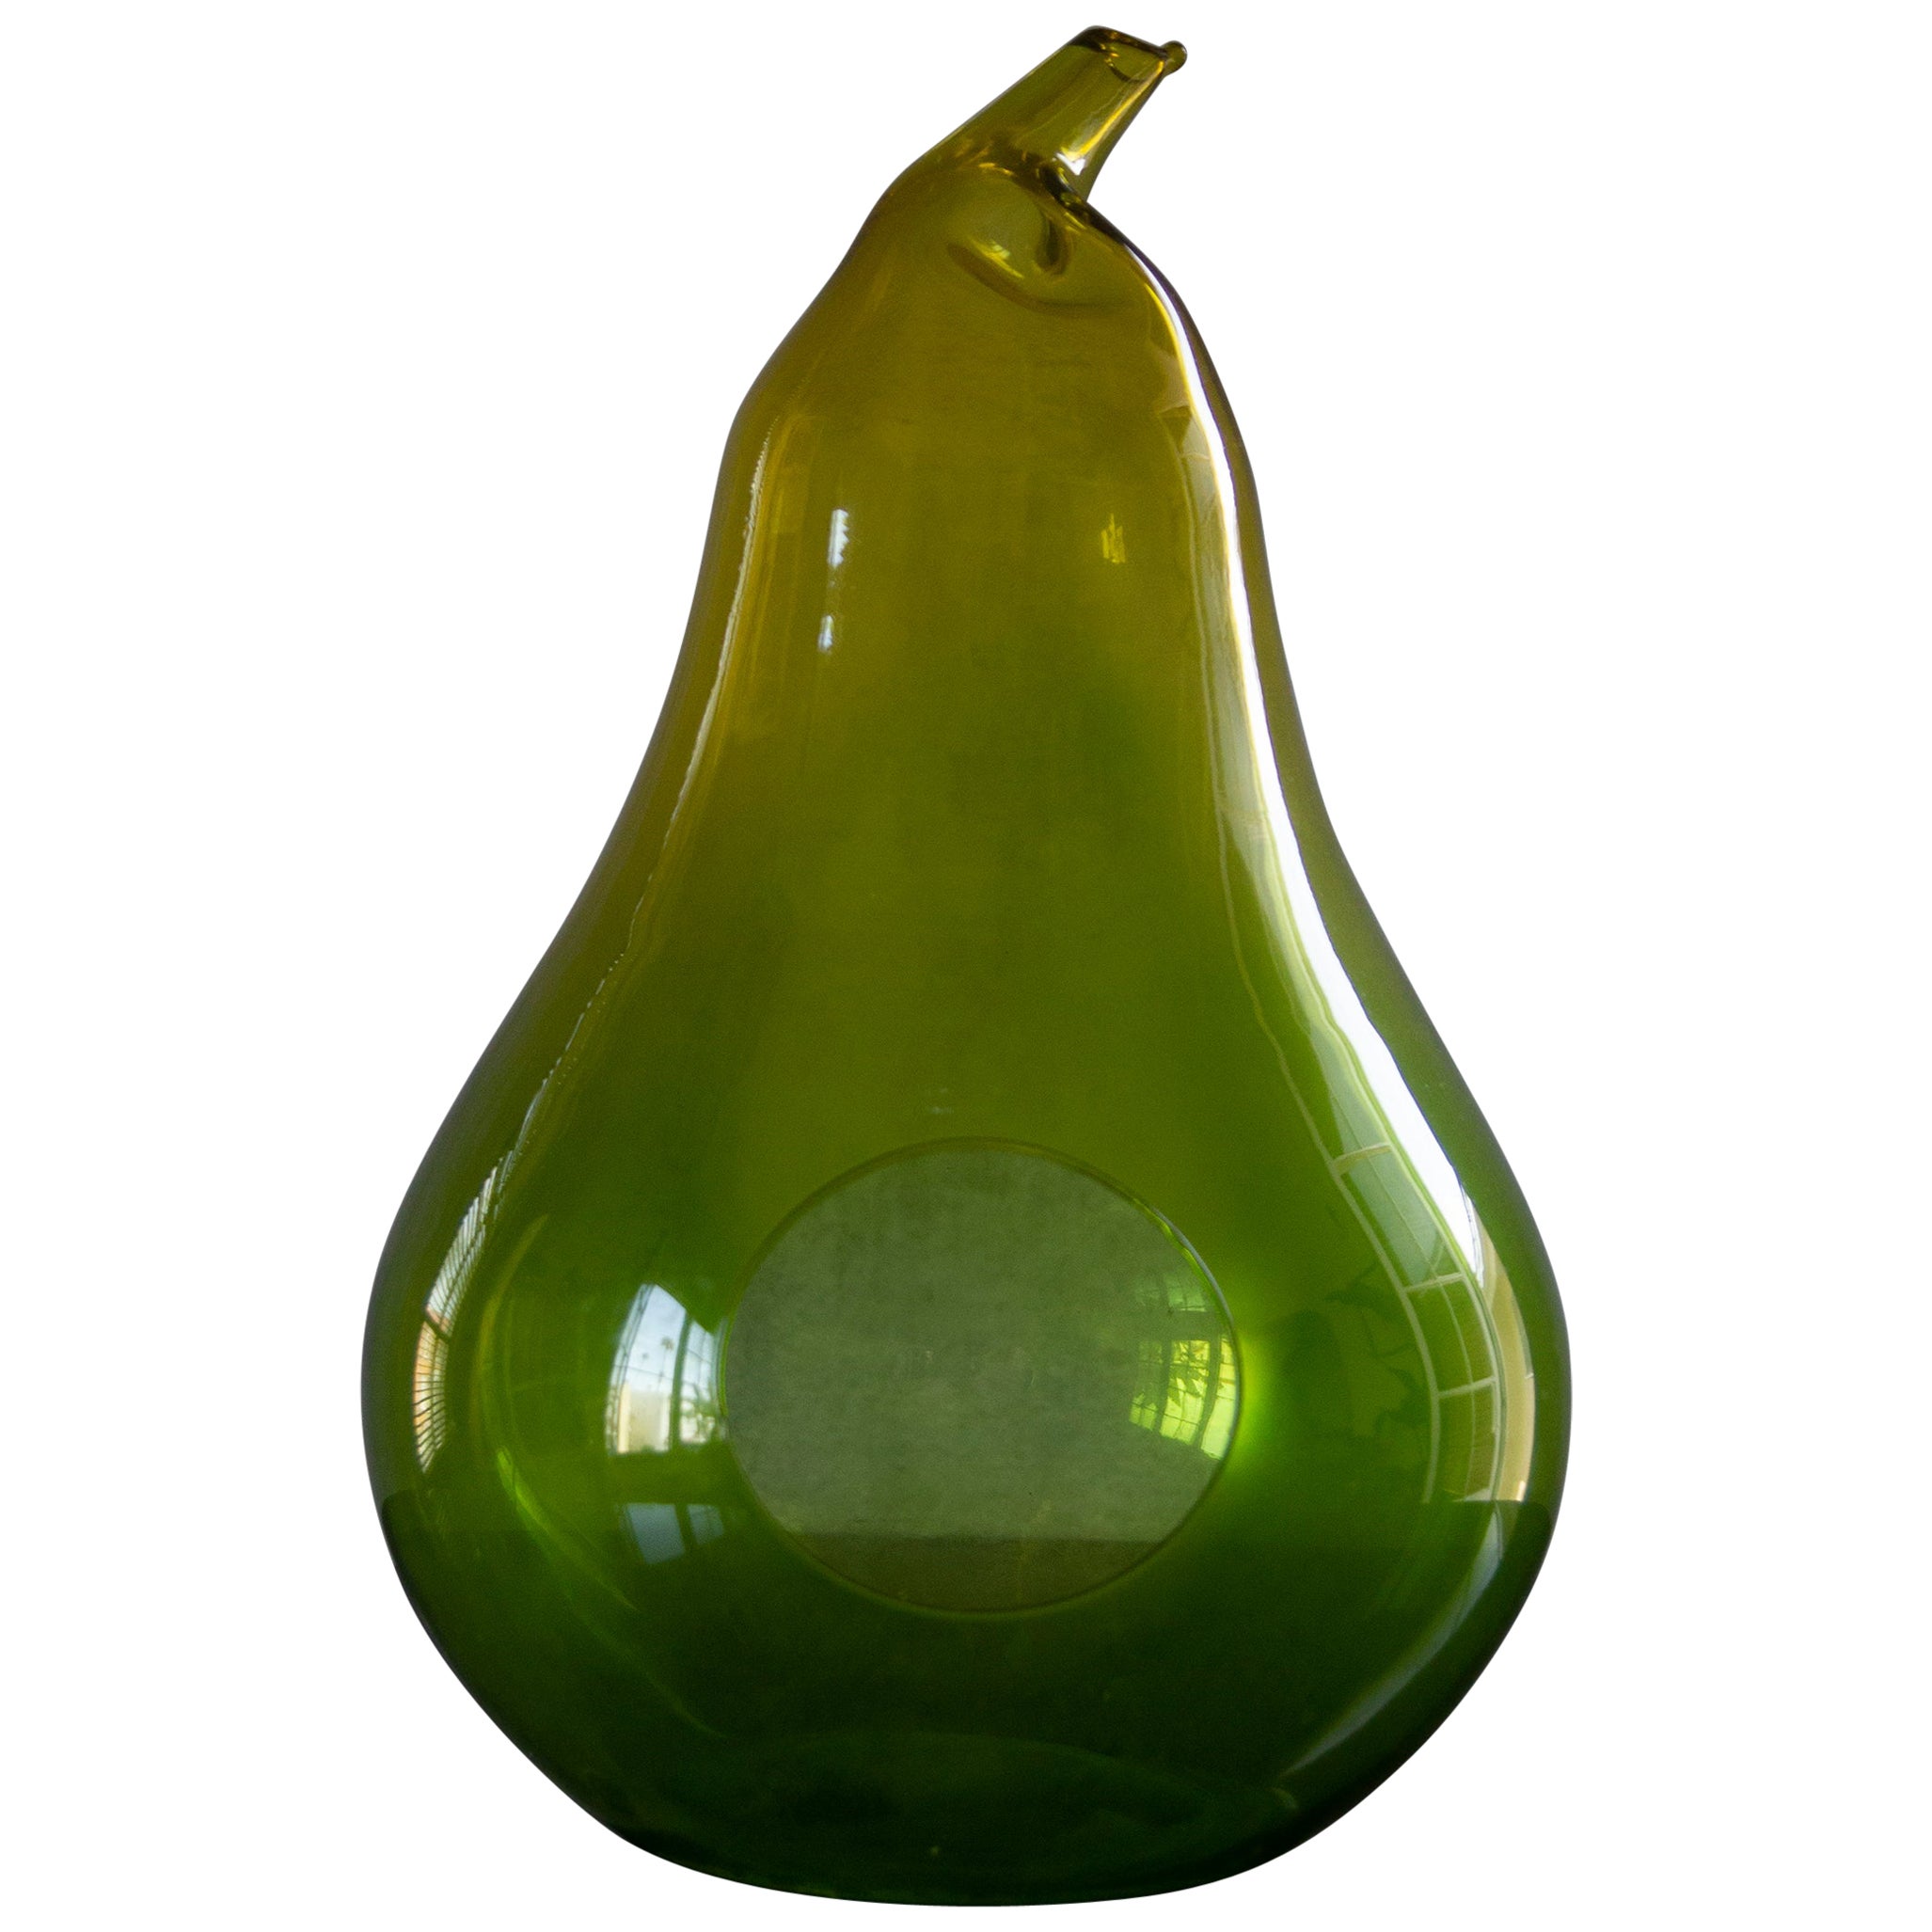 Vintage Blenko Hand Blown Glass Green Pear with Gold Stem